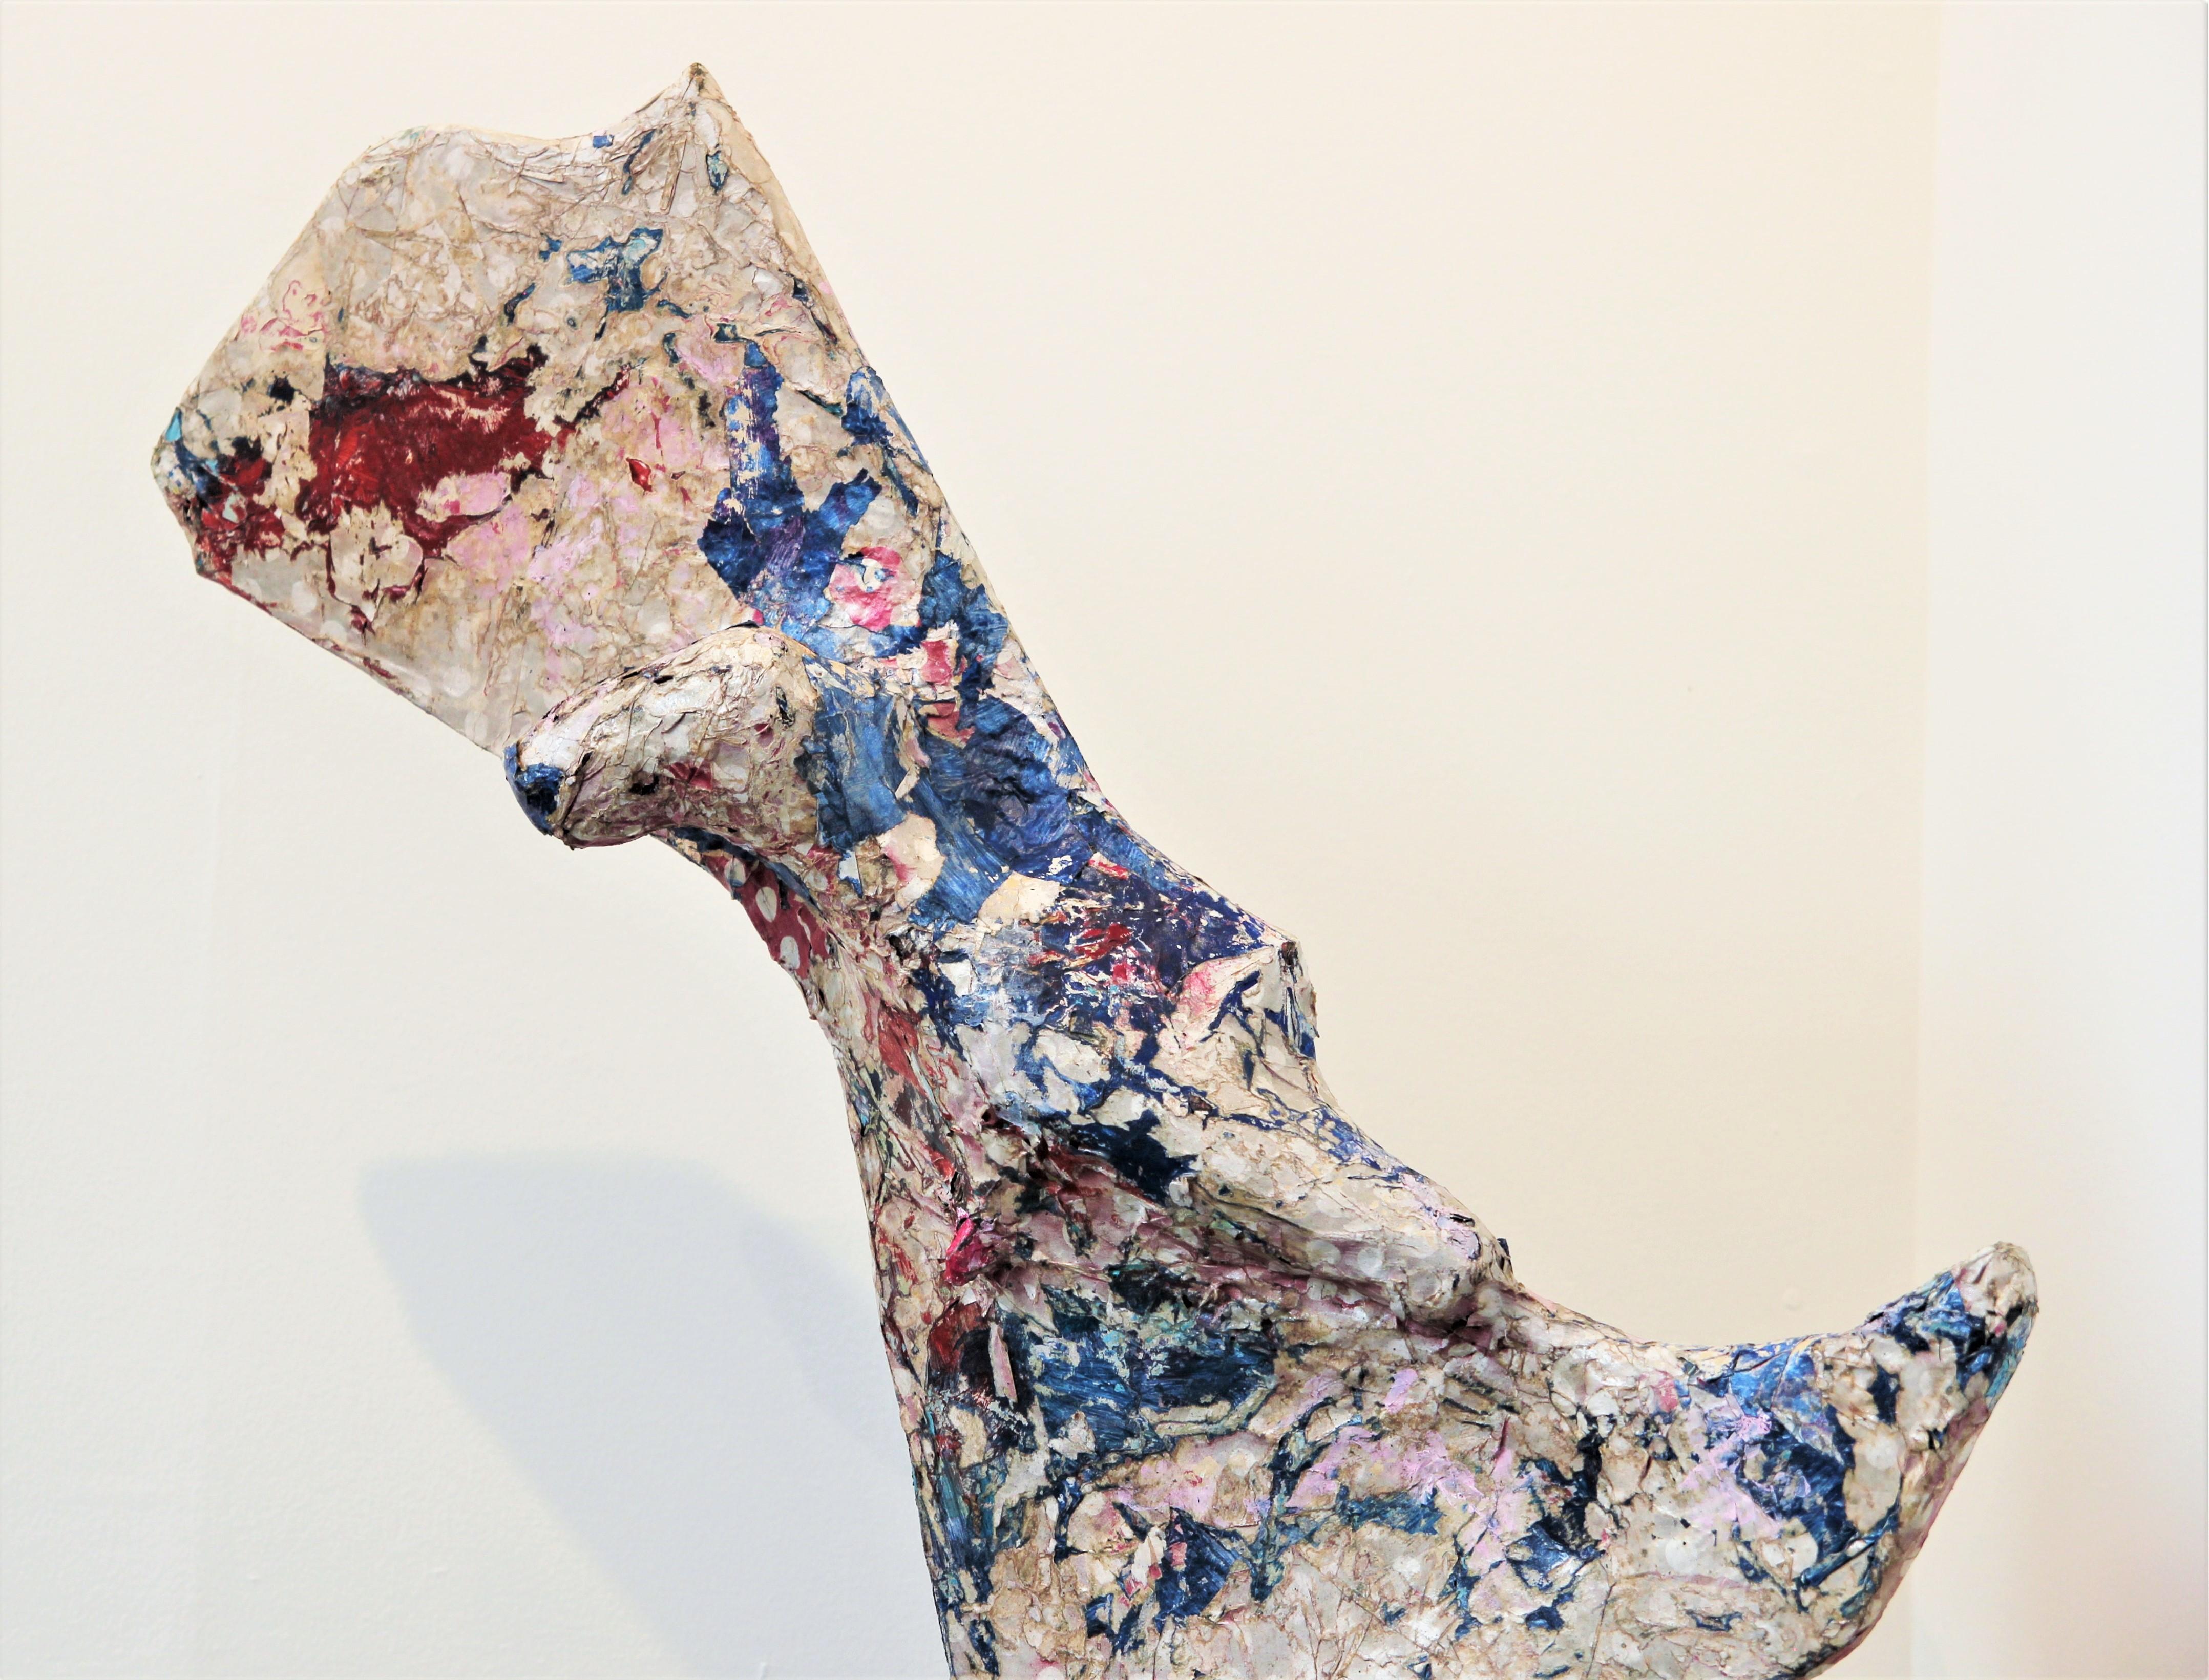 Red and blue abstract contemporary collage sculpture that incorporates wrapping paper, cardboard, wood, acrylic paint, and wood glue. The organic, amorphous form features a primarily white surface with accents of bright reds, blues, and pinks.